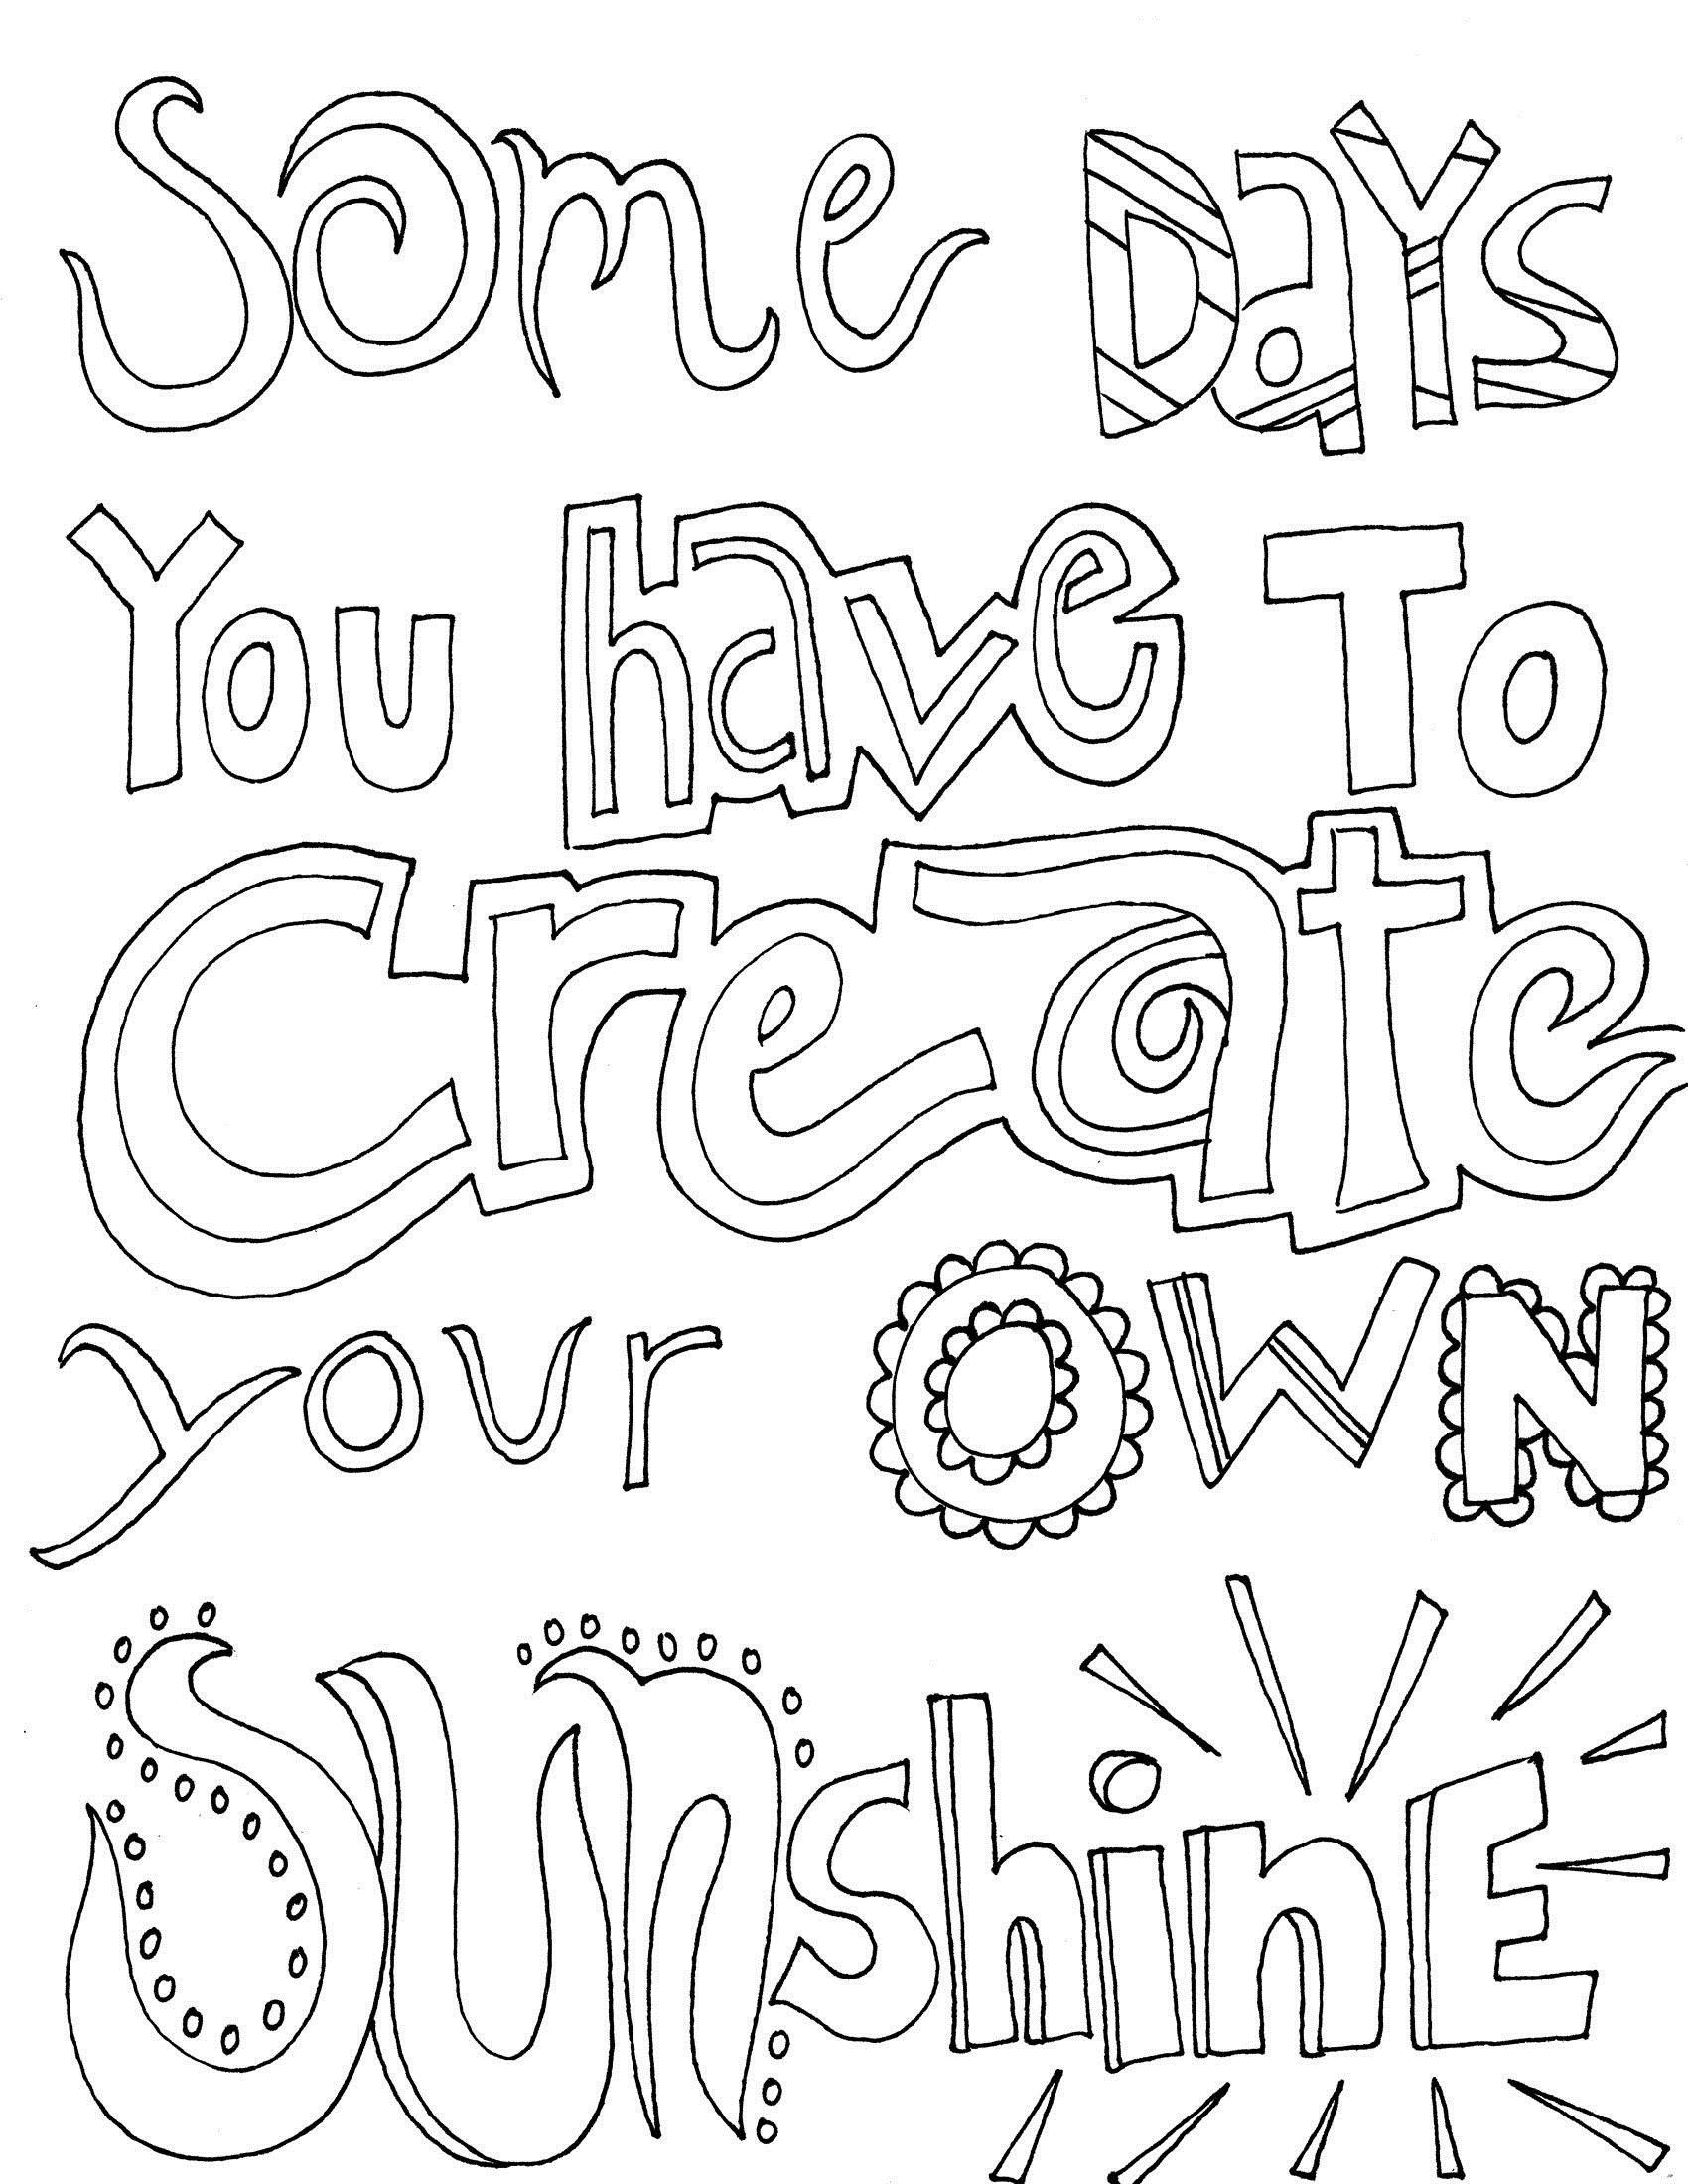 Quote and sayings coloring pages activity shelter